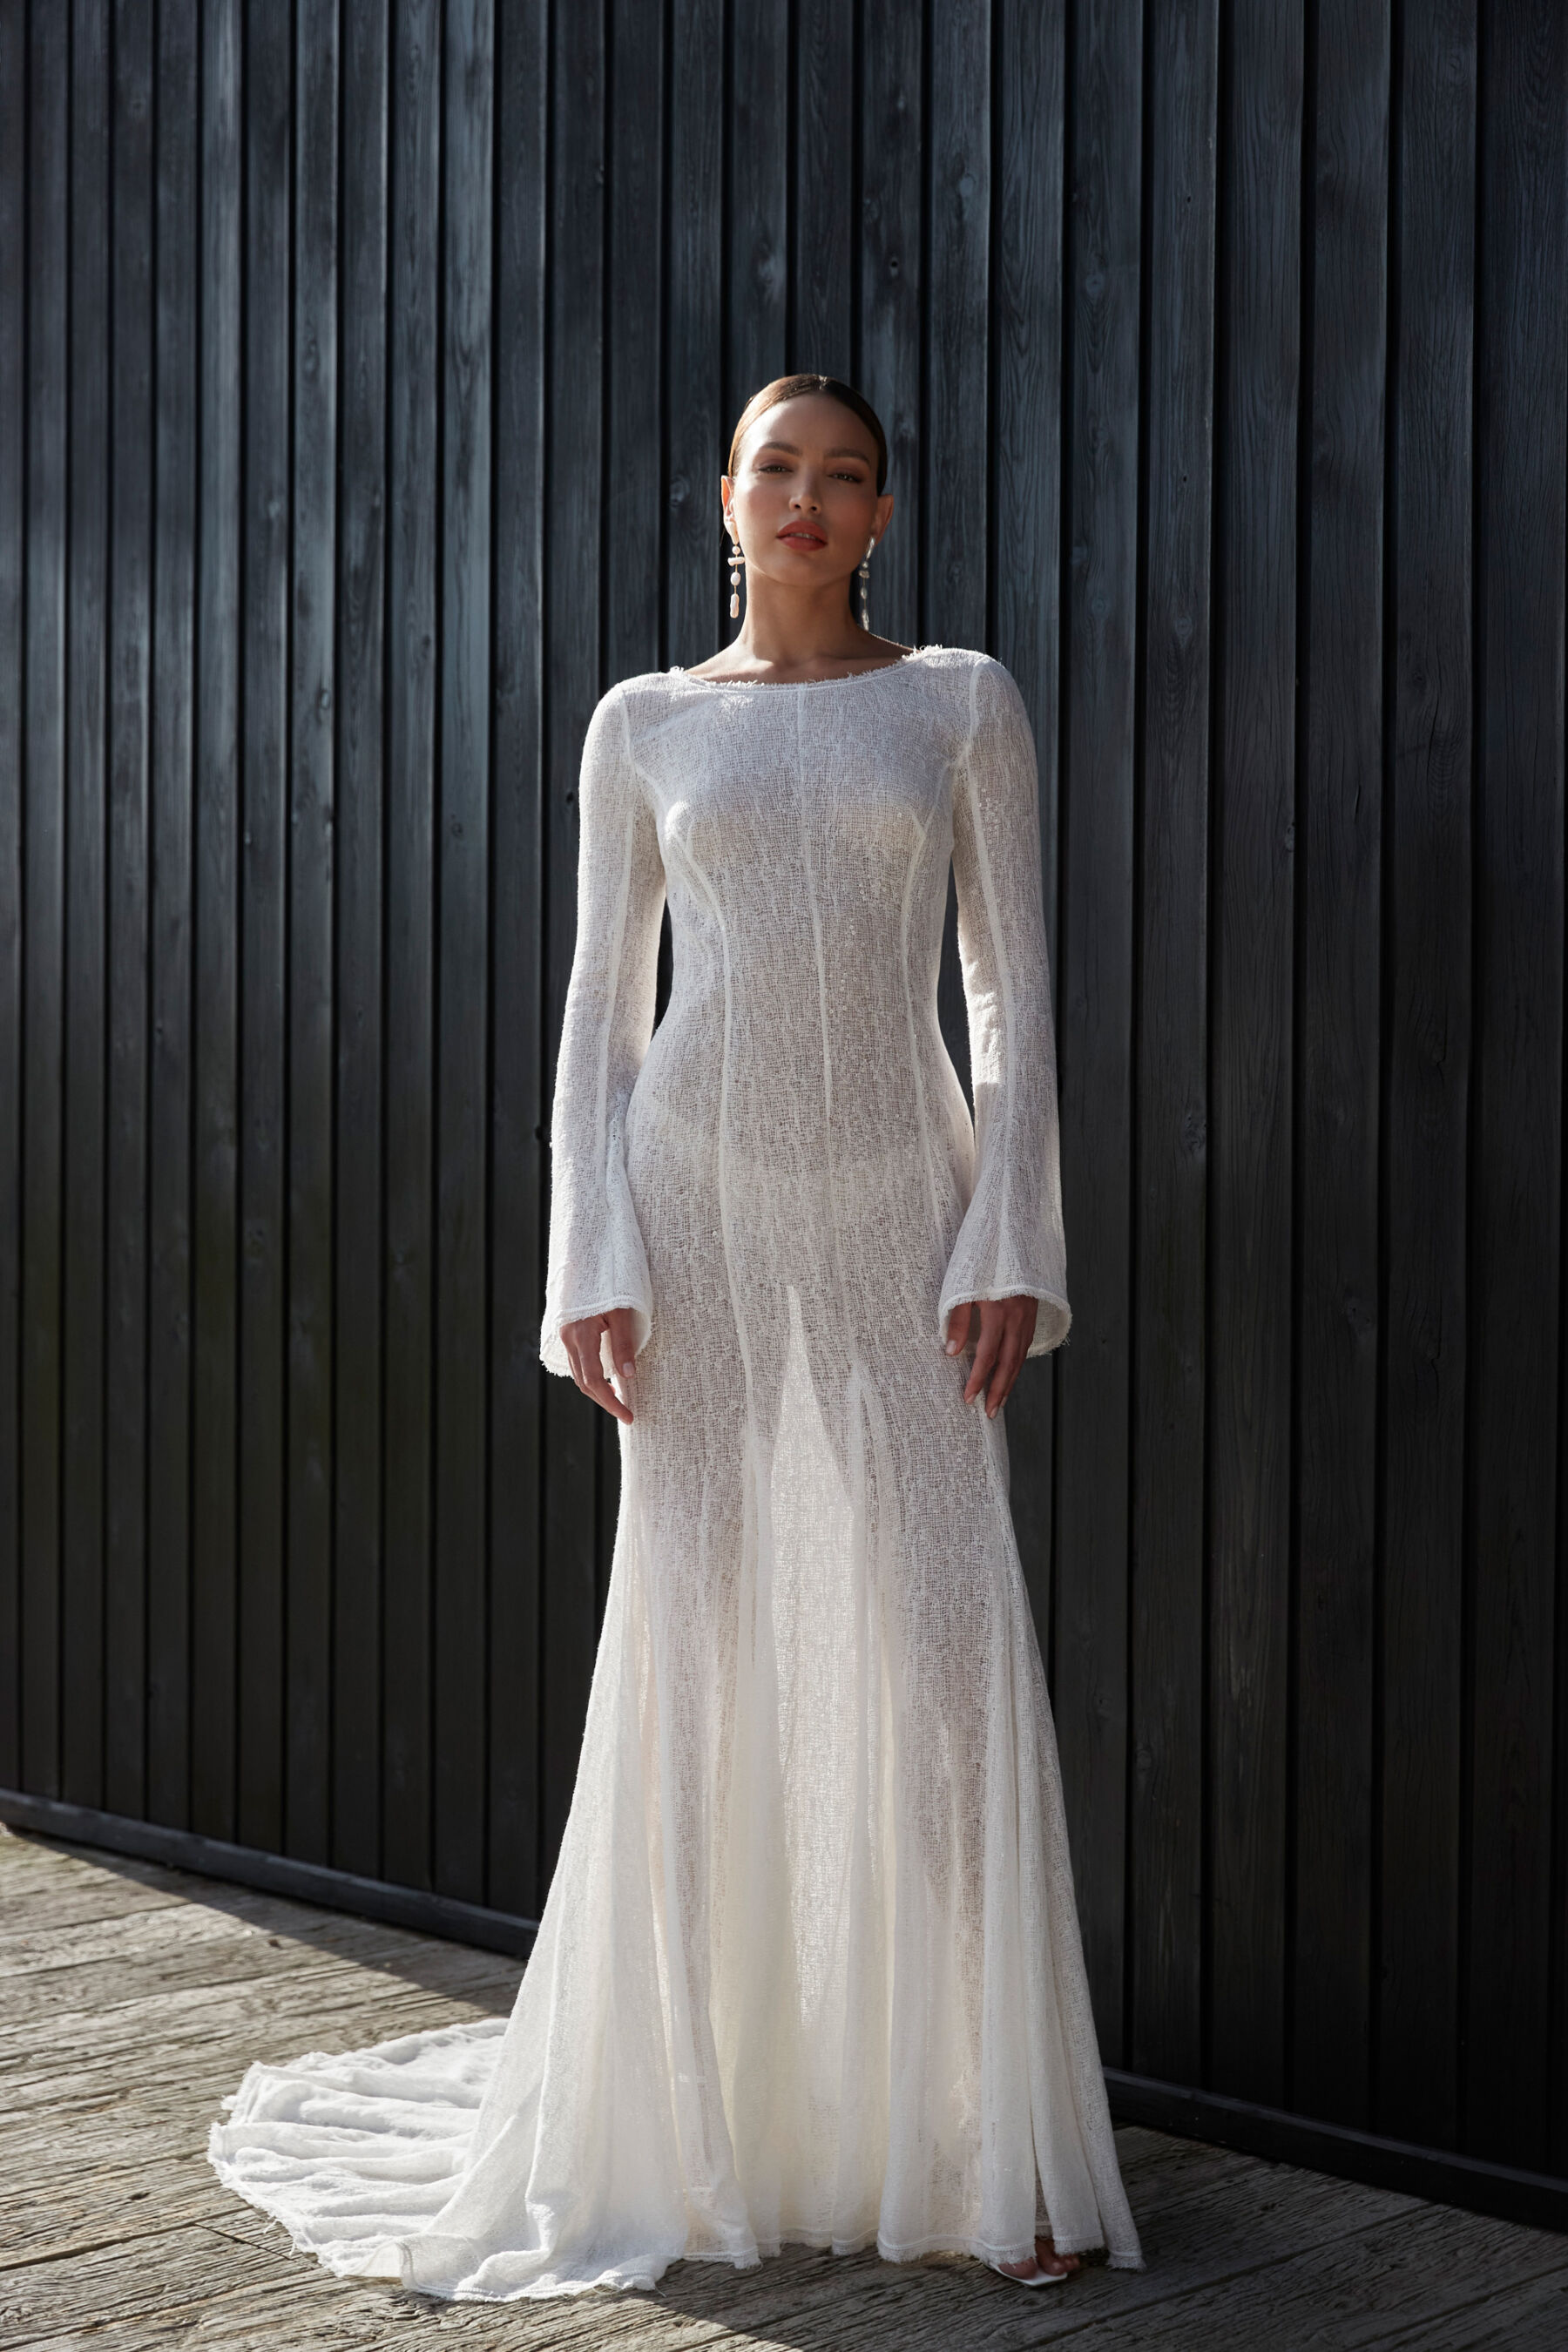 Modern long sleeved wedding dress by Sassi Holford at Carina Baverstock Couture